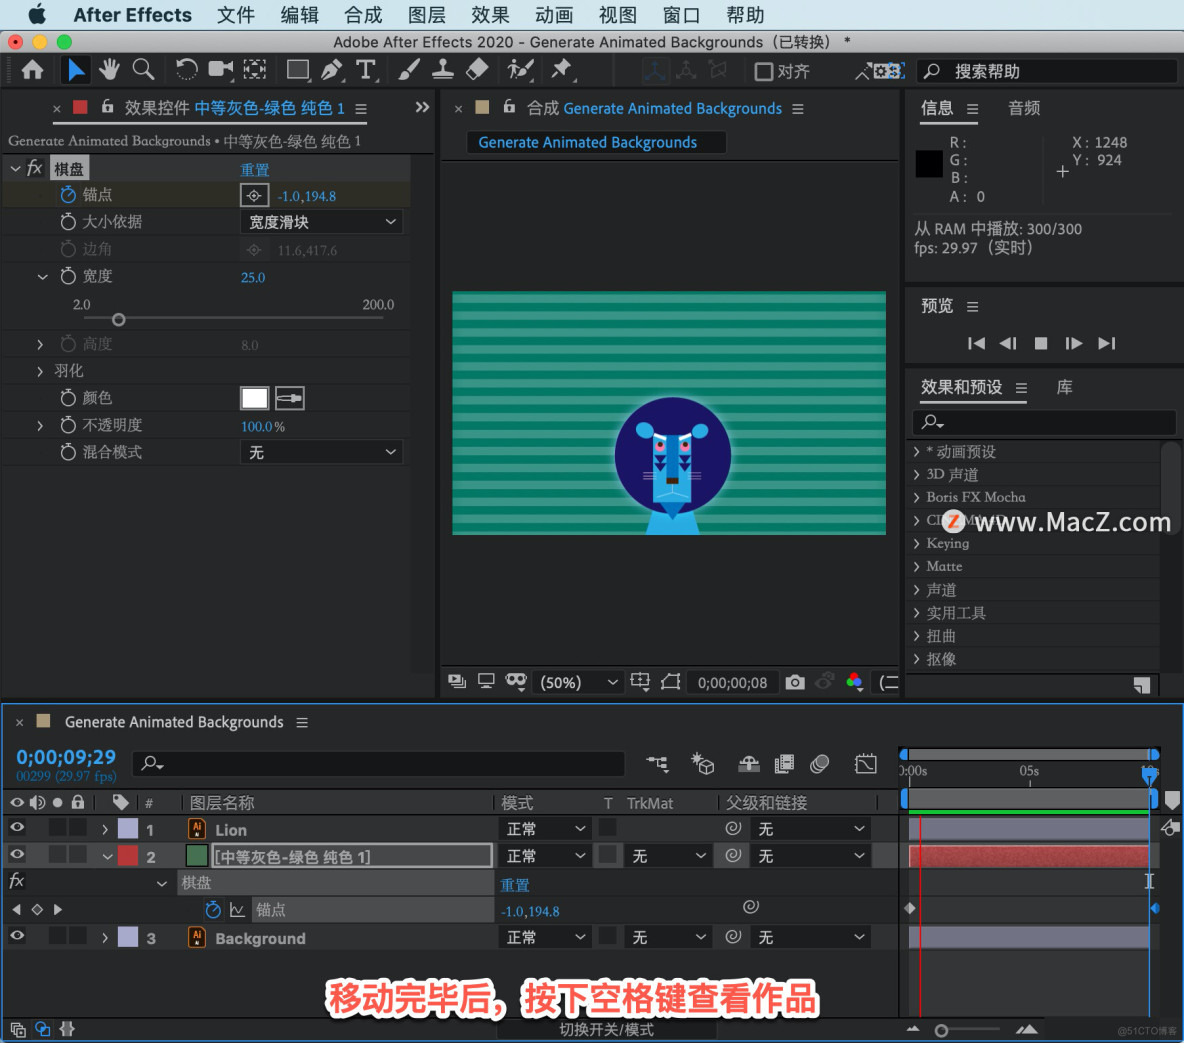 After Effects 教程，如何在 After Effects 中给条纹背景添加动画效果？_AE_07